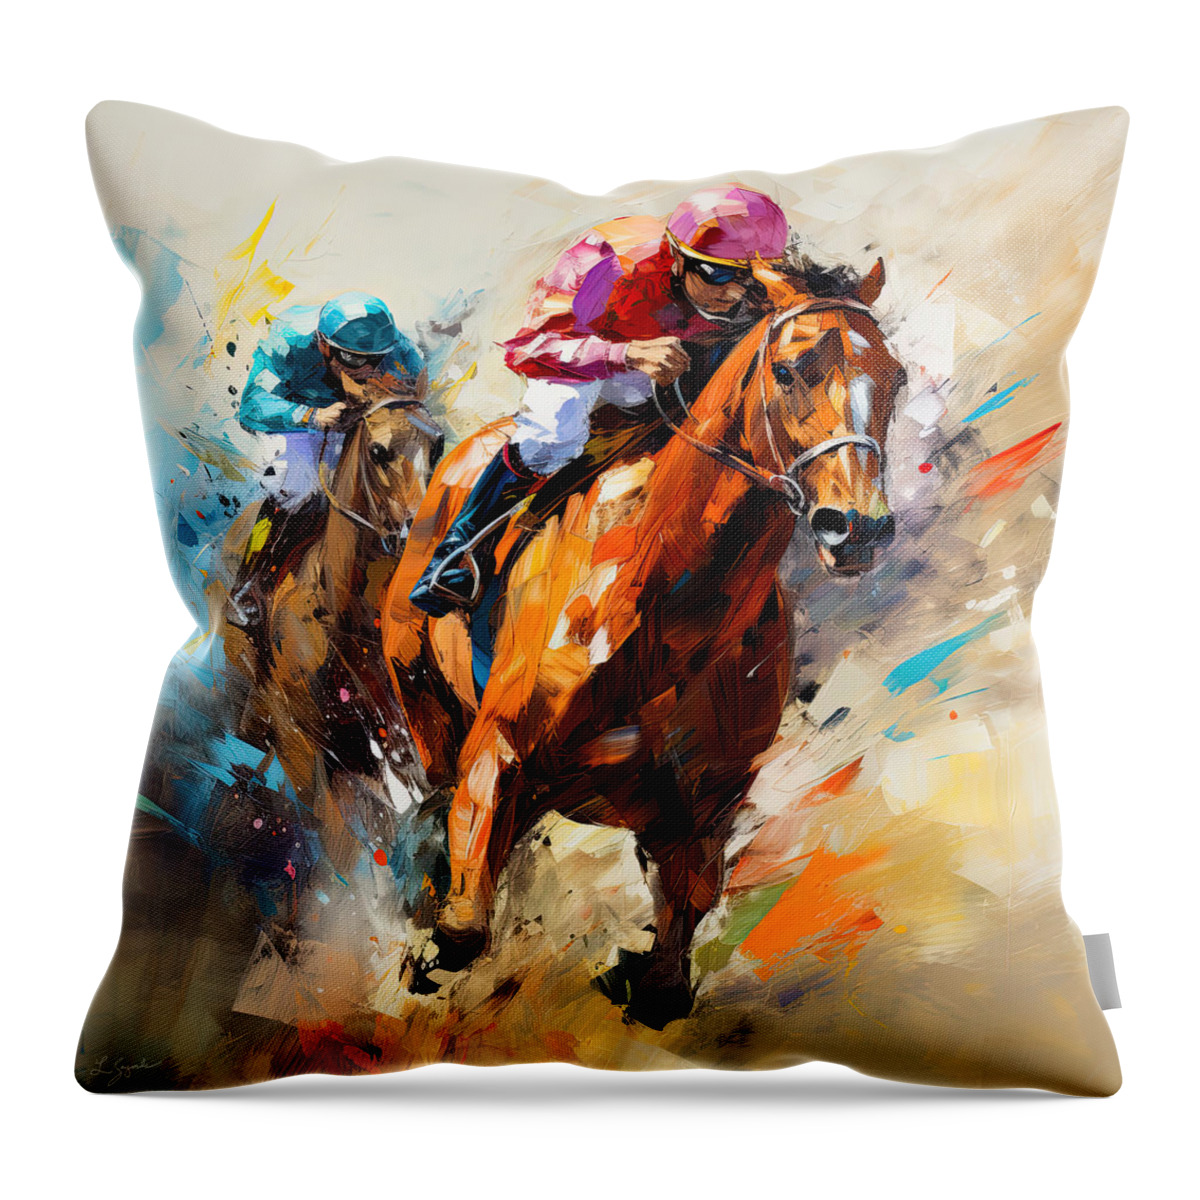 Horse Racing Throw Pillow featuring the digital art Horse Racing III - Colorful Horse Racing Artwork by Lourry Legarde